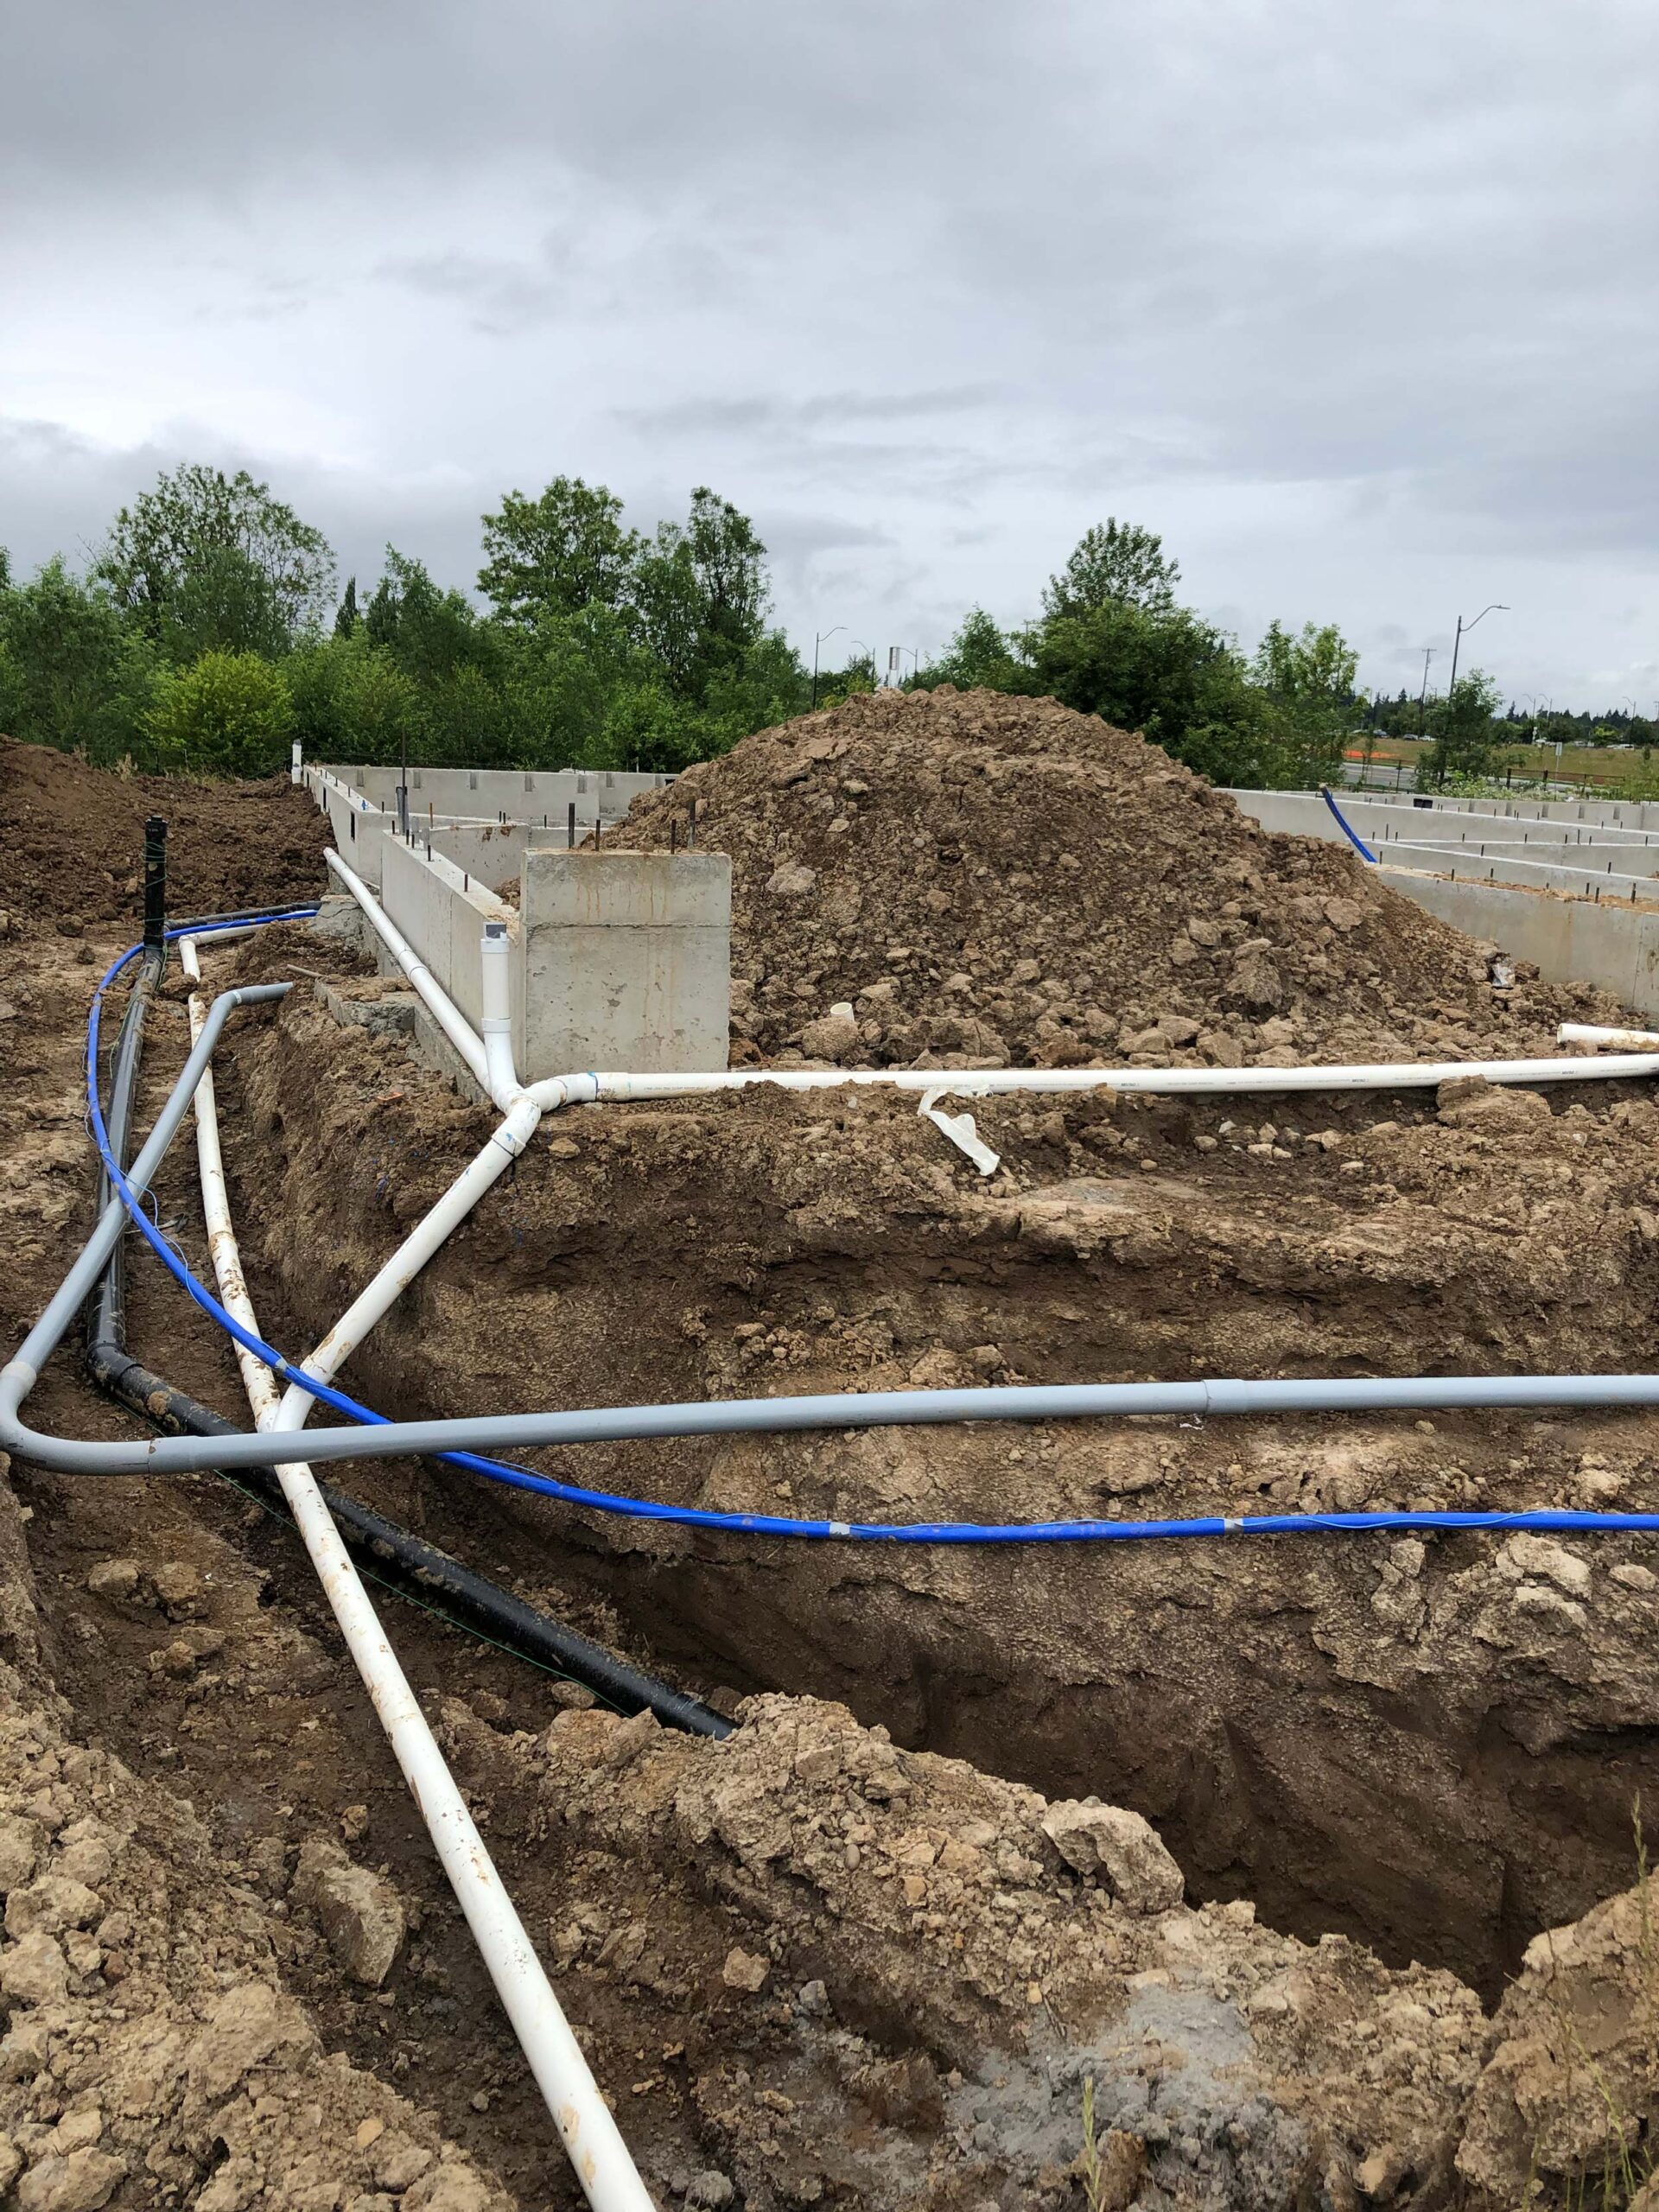 Blue electrical line and white sewer pipes in the ground in at construction site.